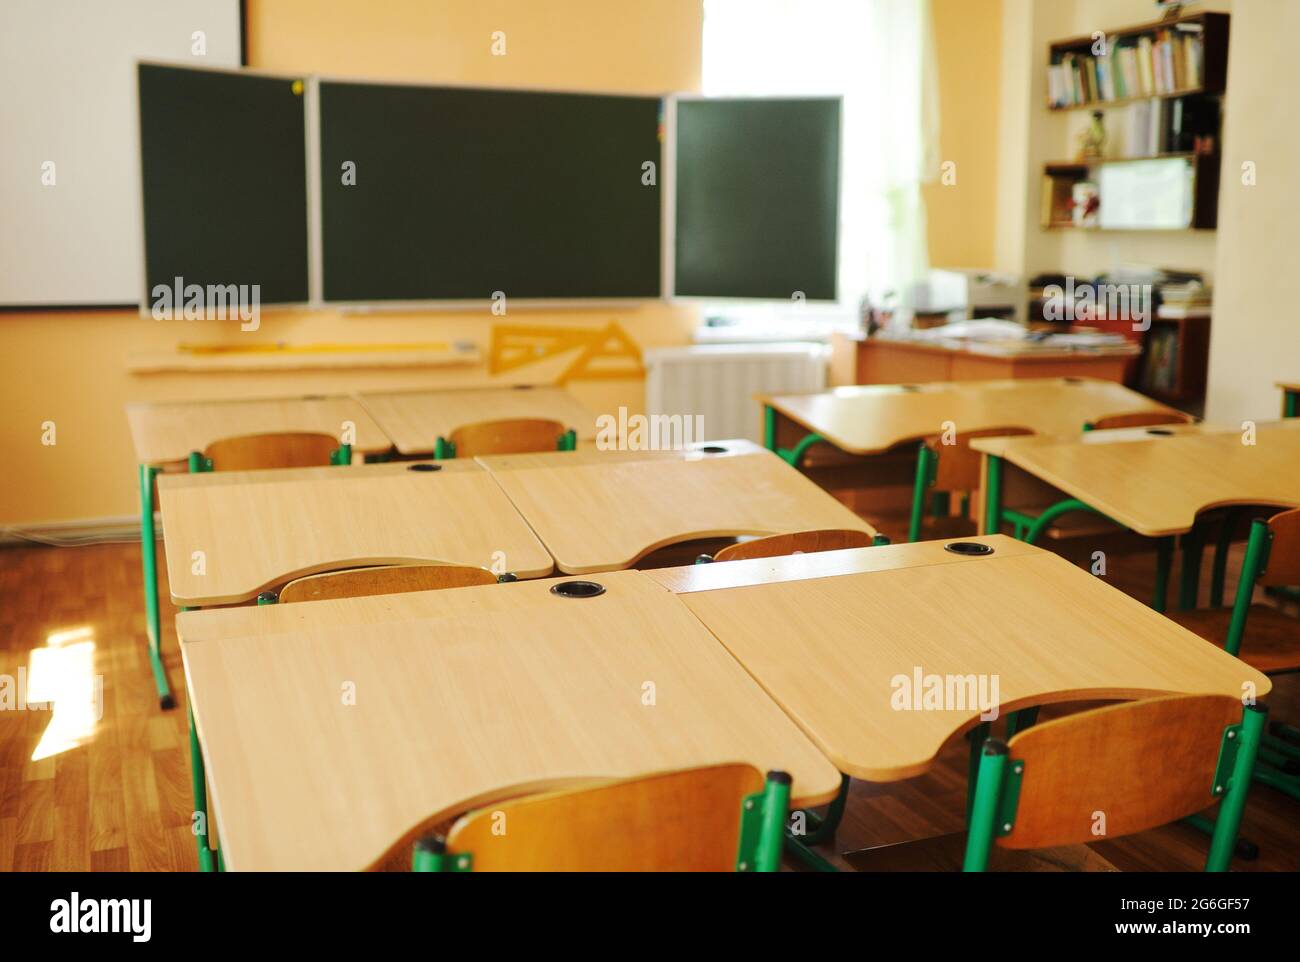 Closeup student chair seat and desk in classroom background with on wooden  floor. Education and Back to school concept. Architecture interior. Social  Stock Photo - Alamy